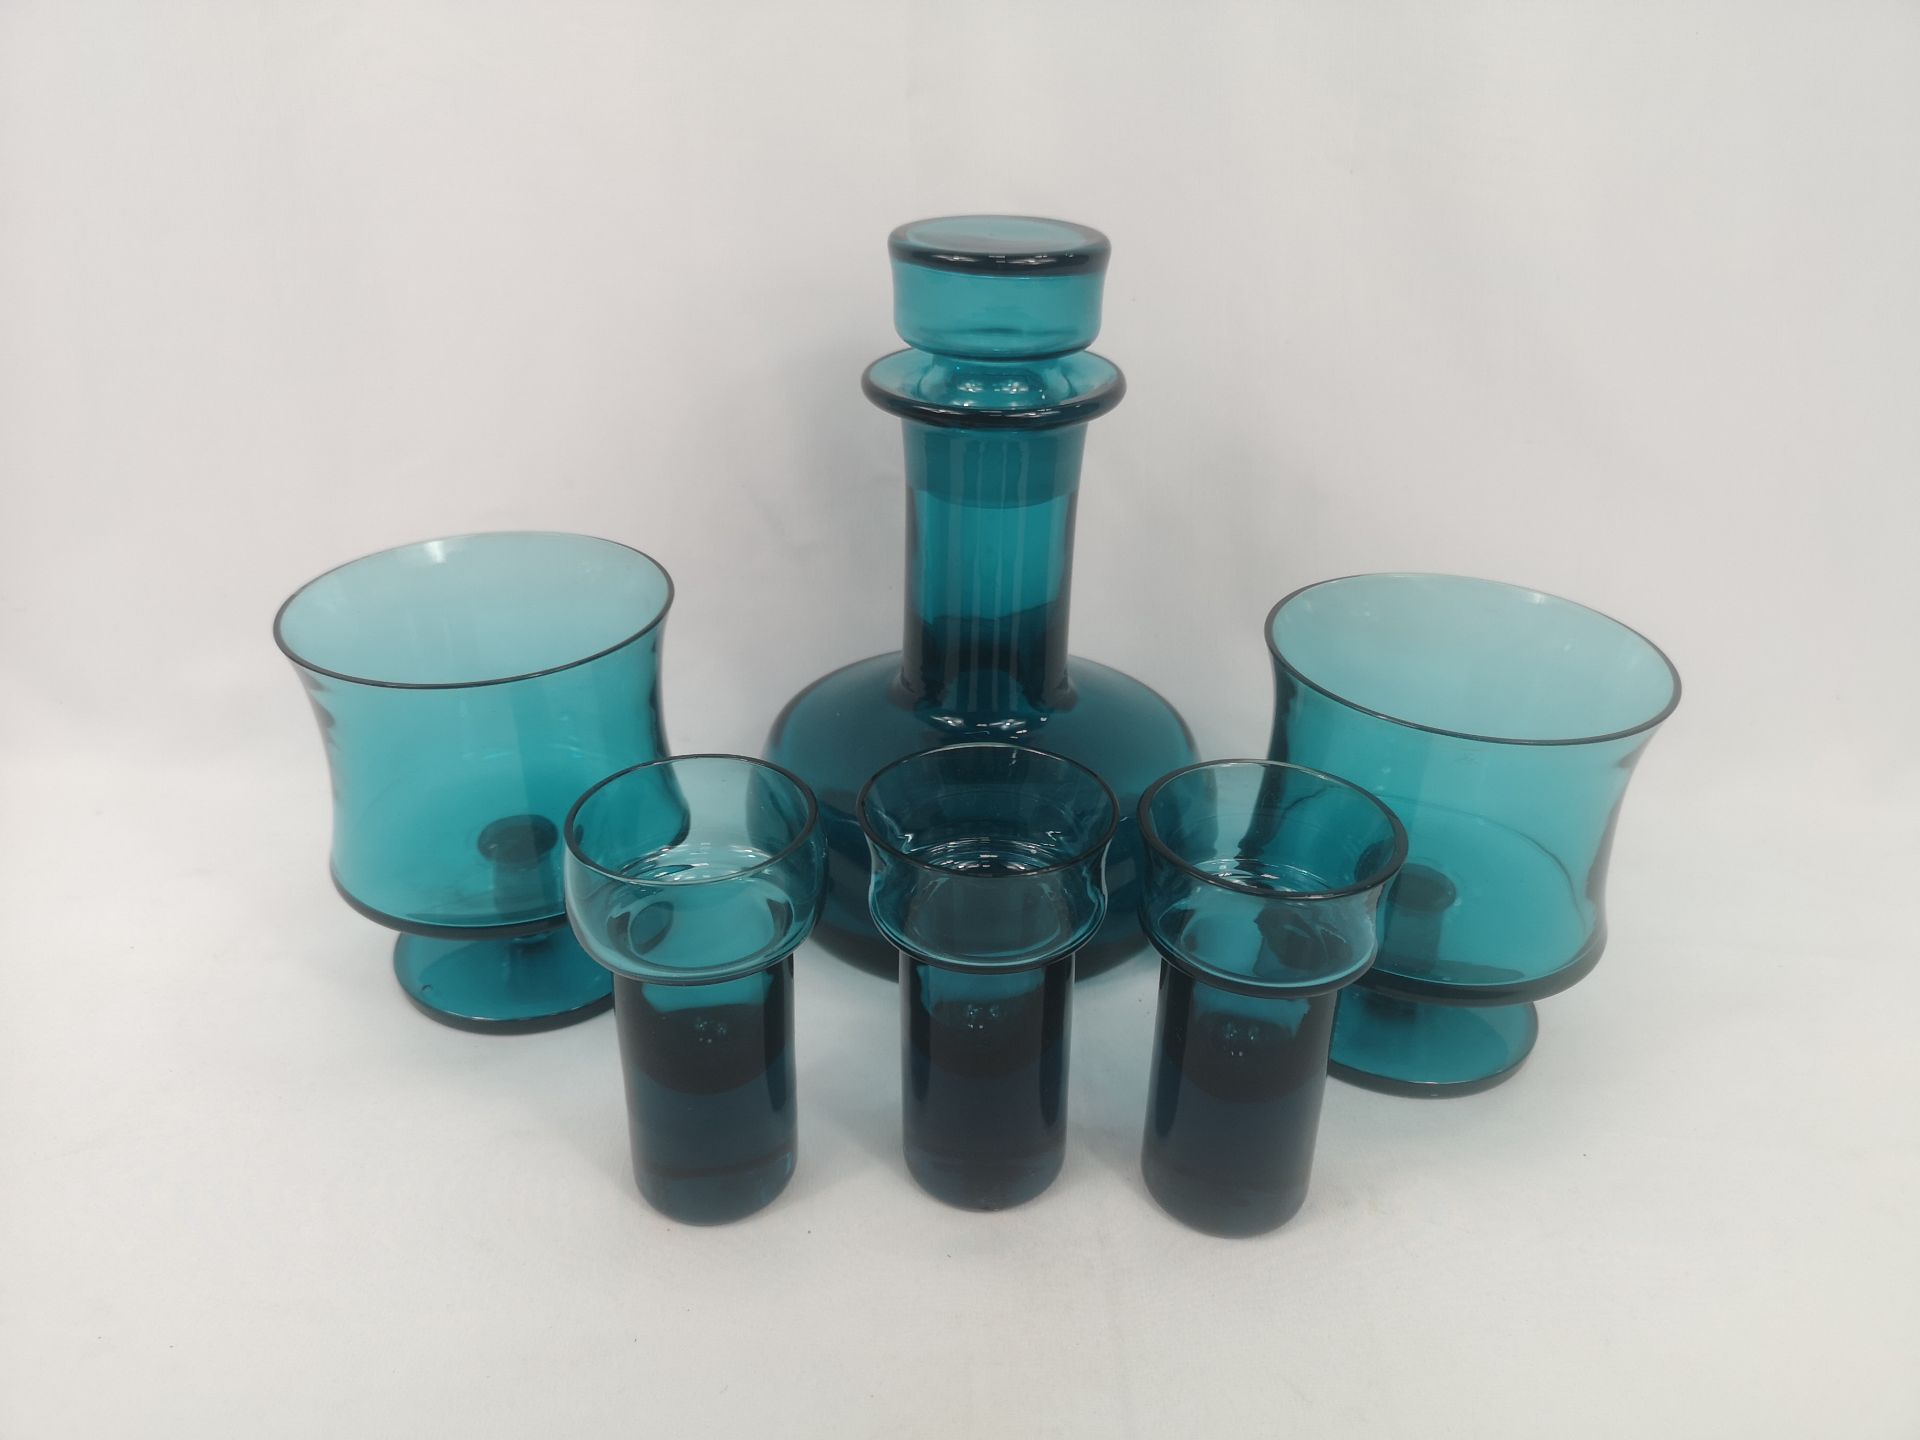 Blue glass decanter together with blue glasses